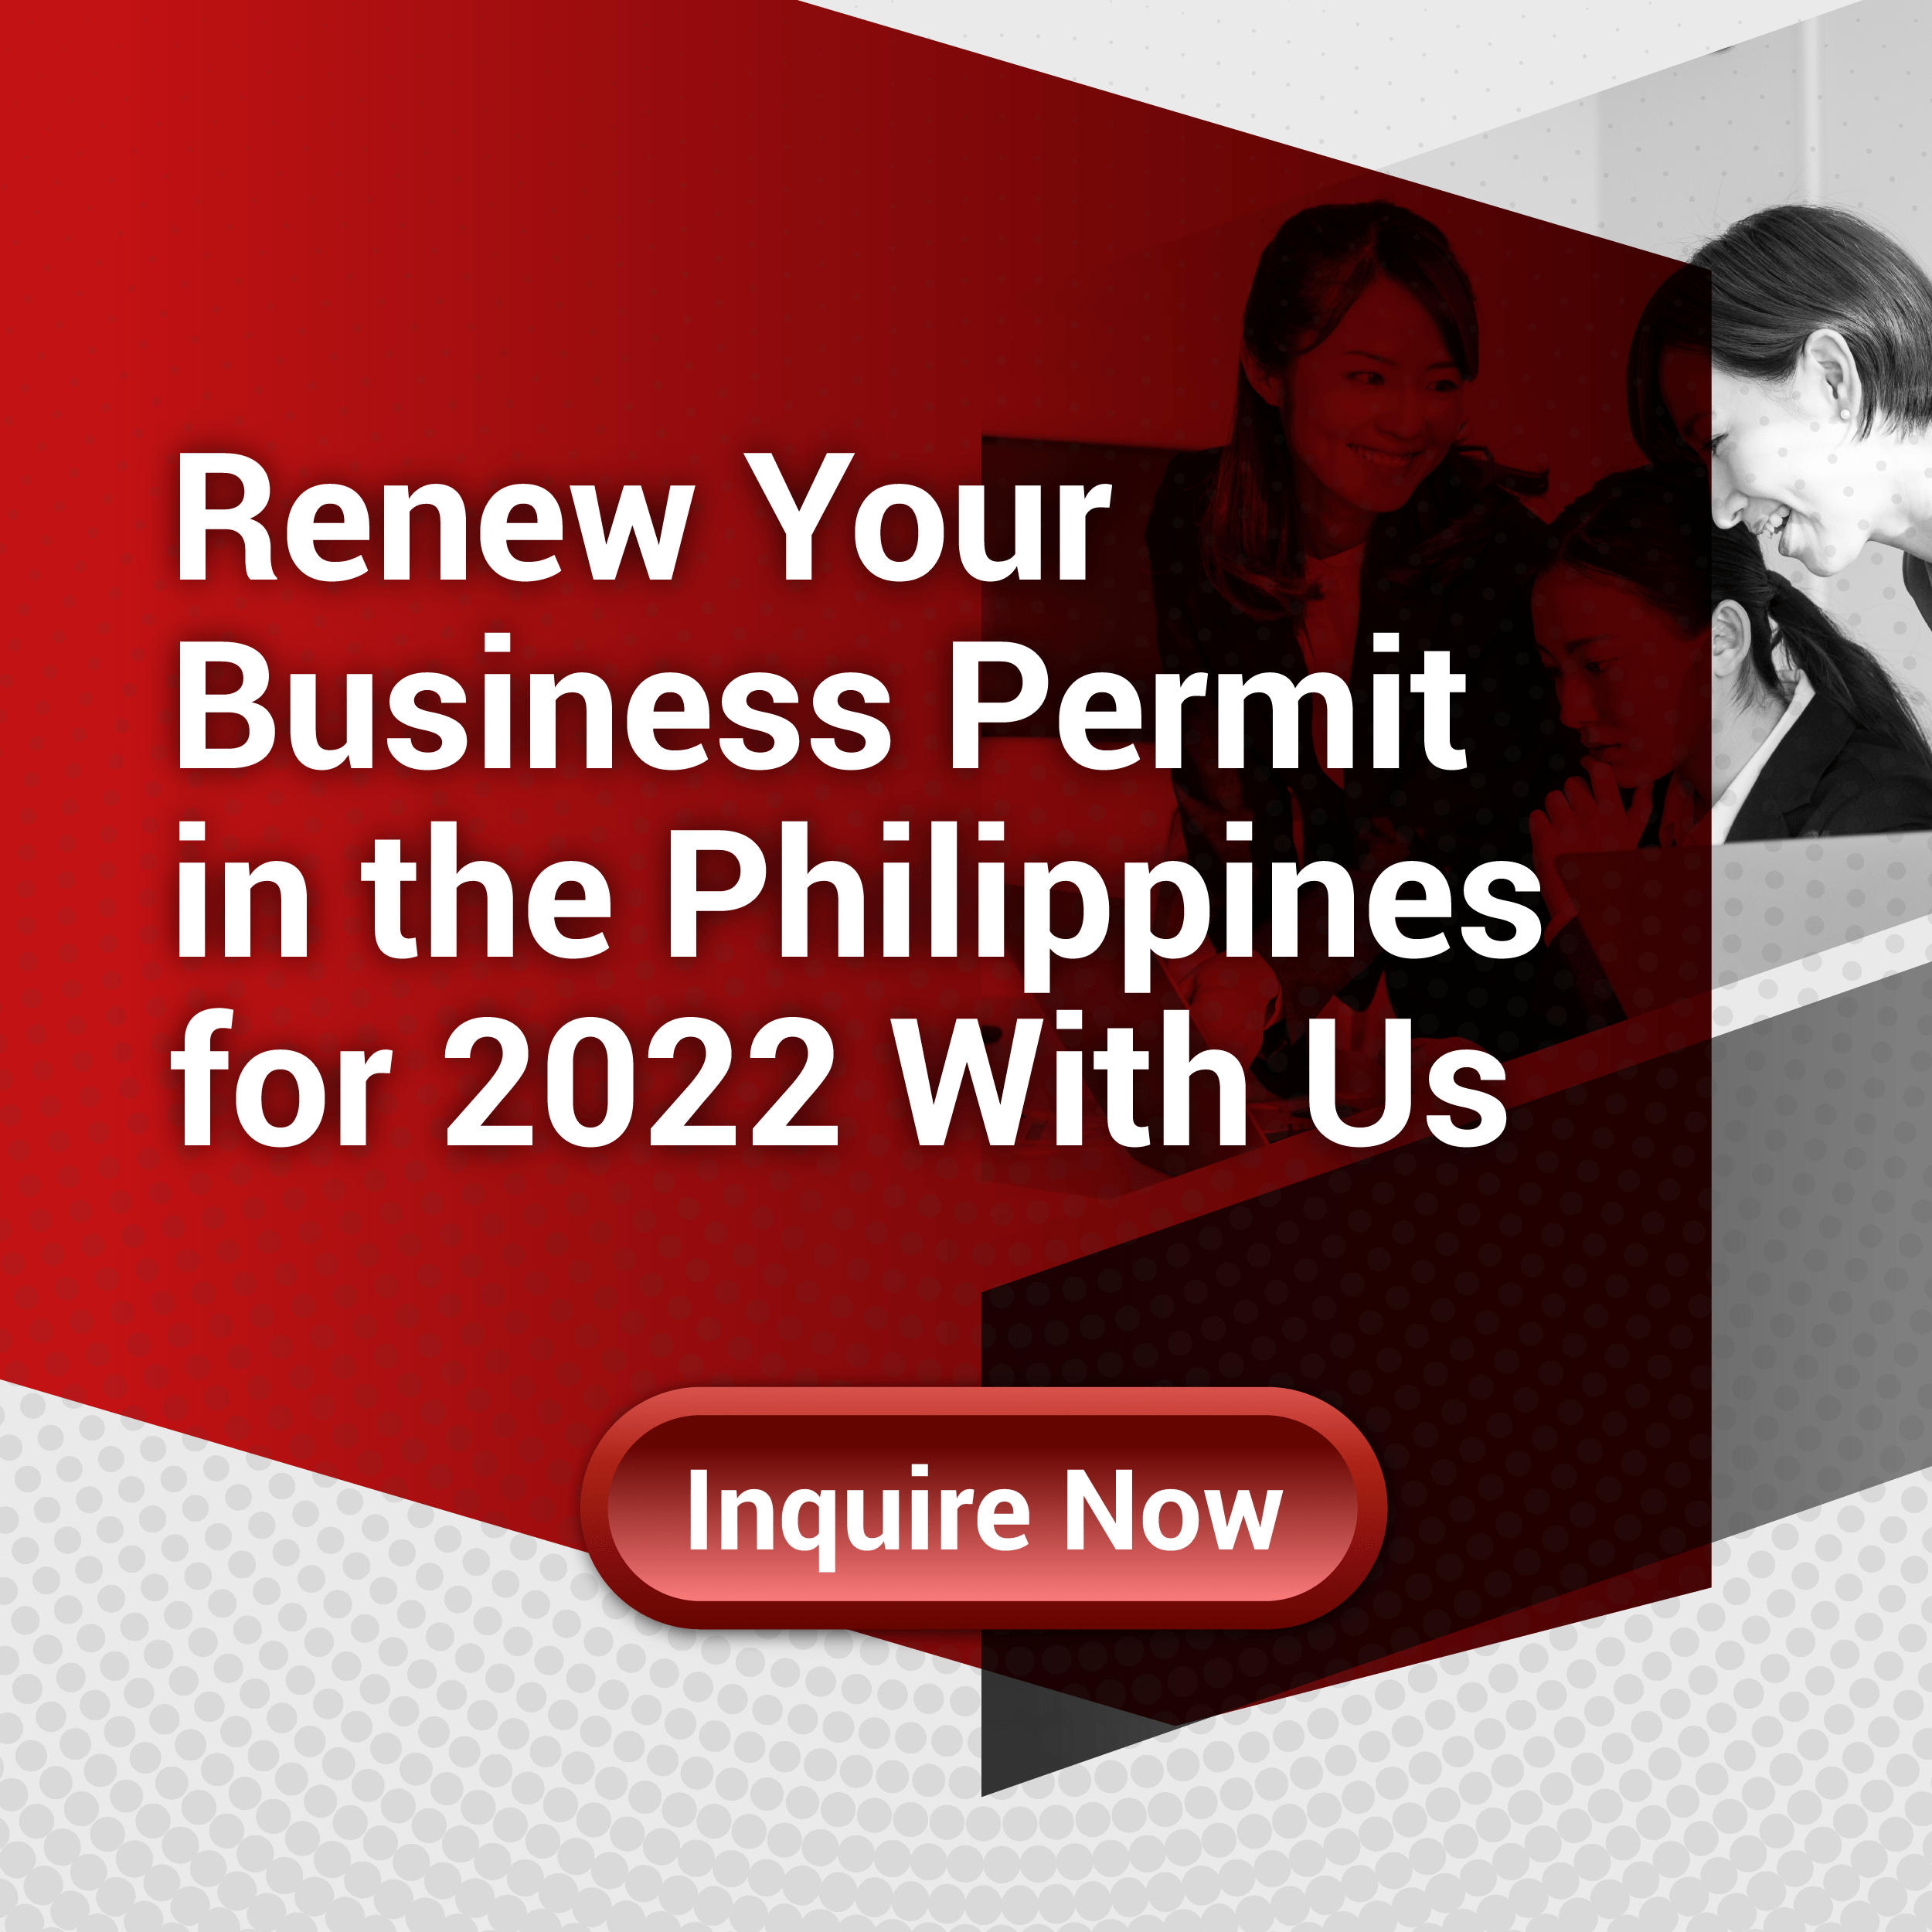 Business Permit Renewal - Contact Form